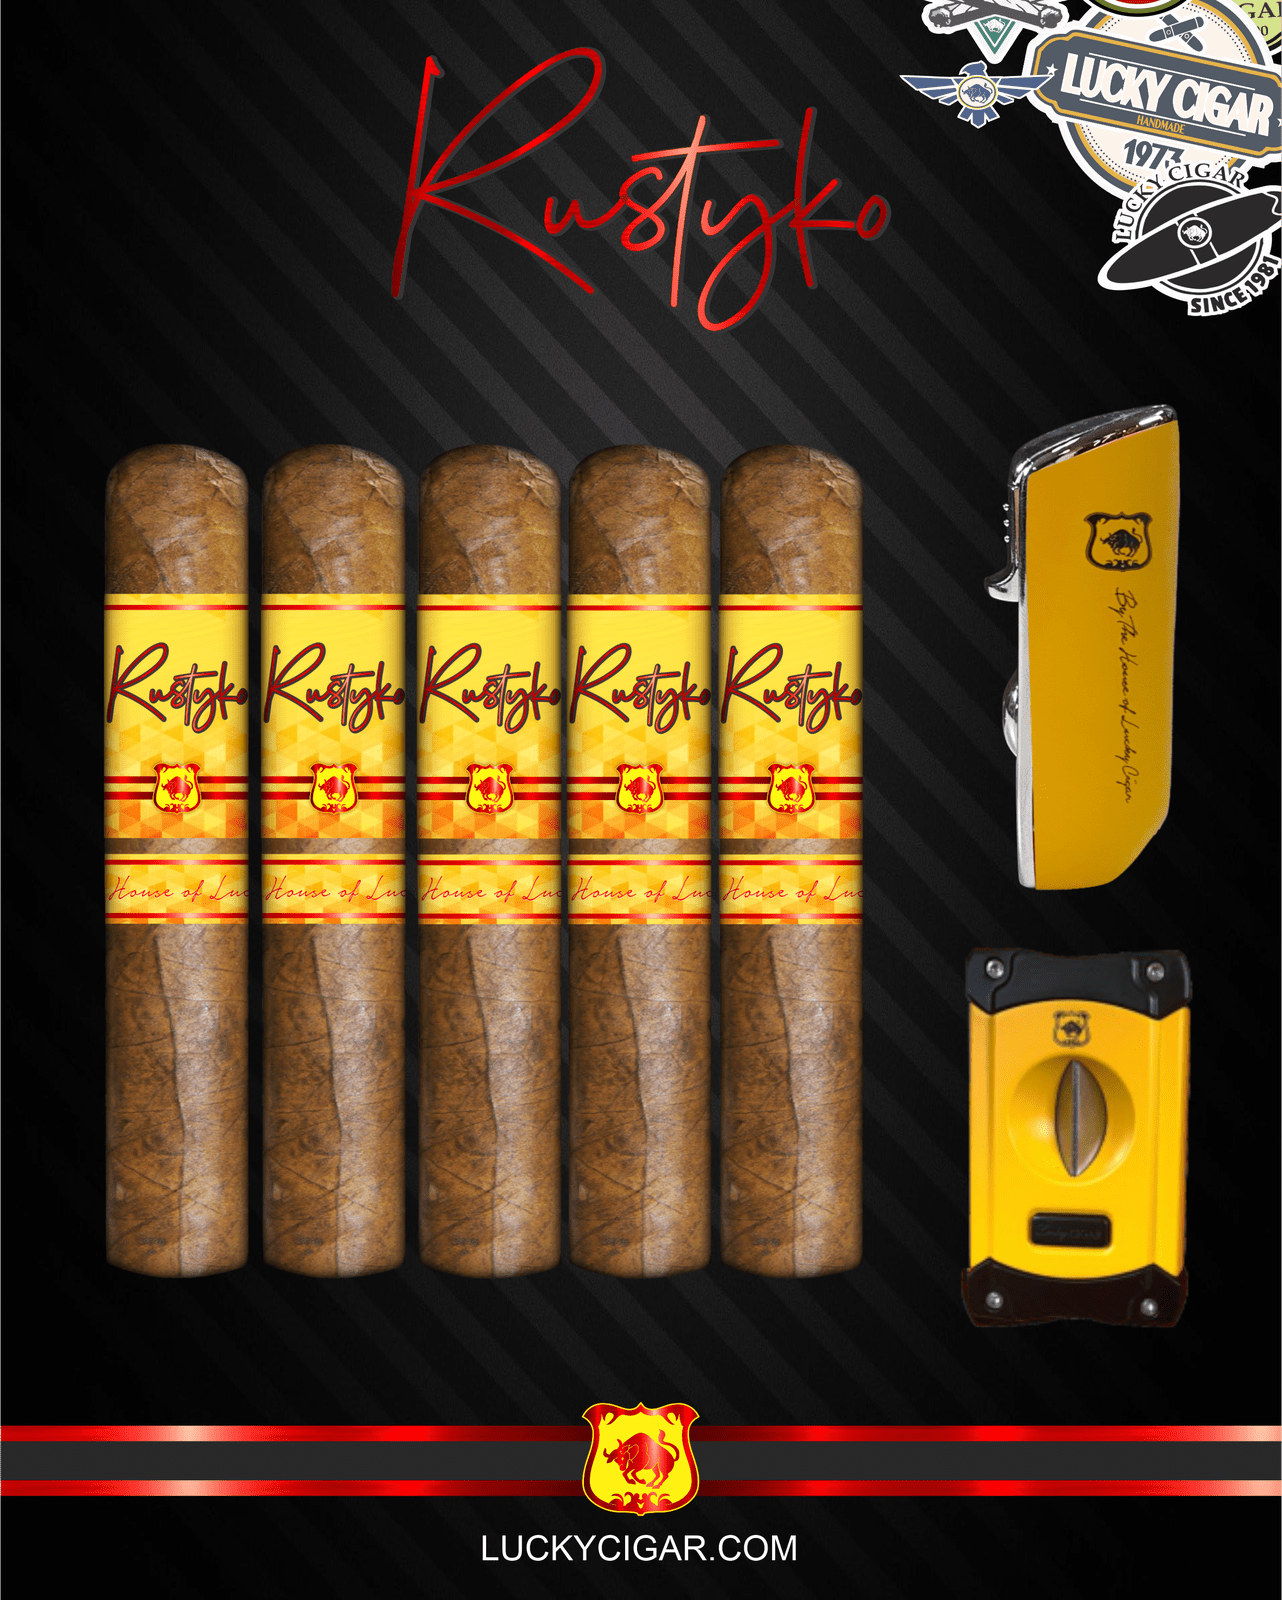 Infused Cigars: Rustyko Robusto 5x54 Cigars - Set of 5 with Yellow Lighter, Cutter